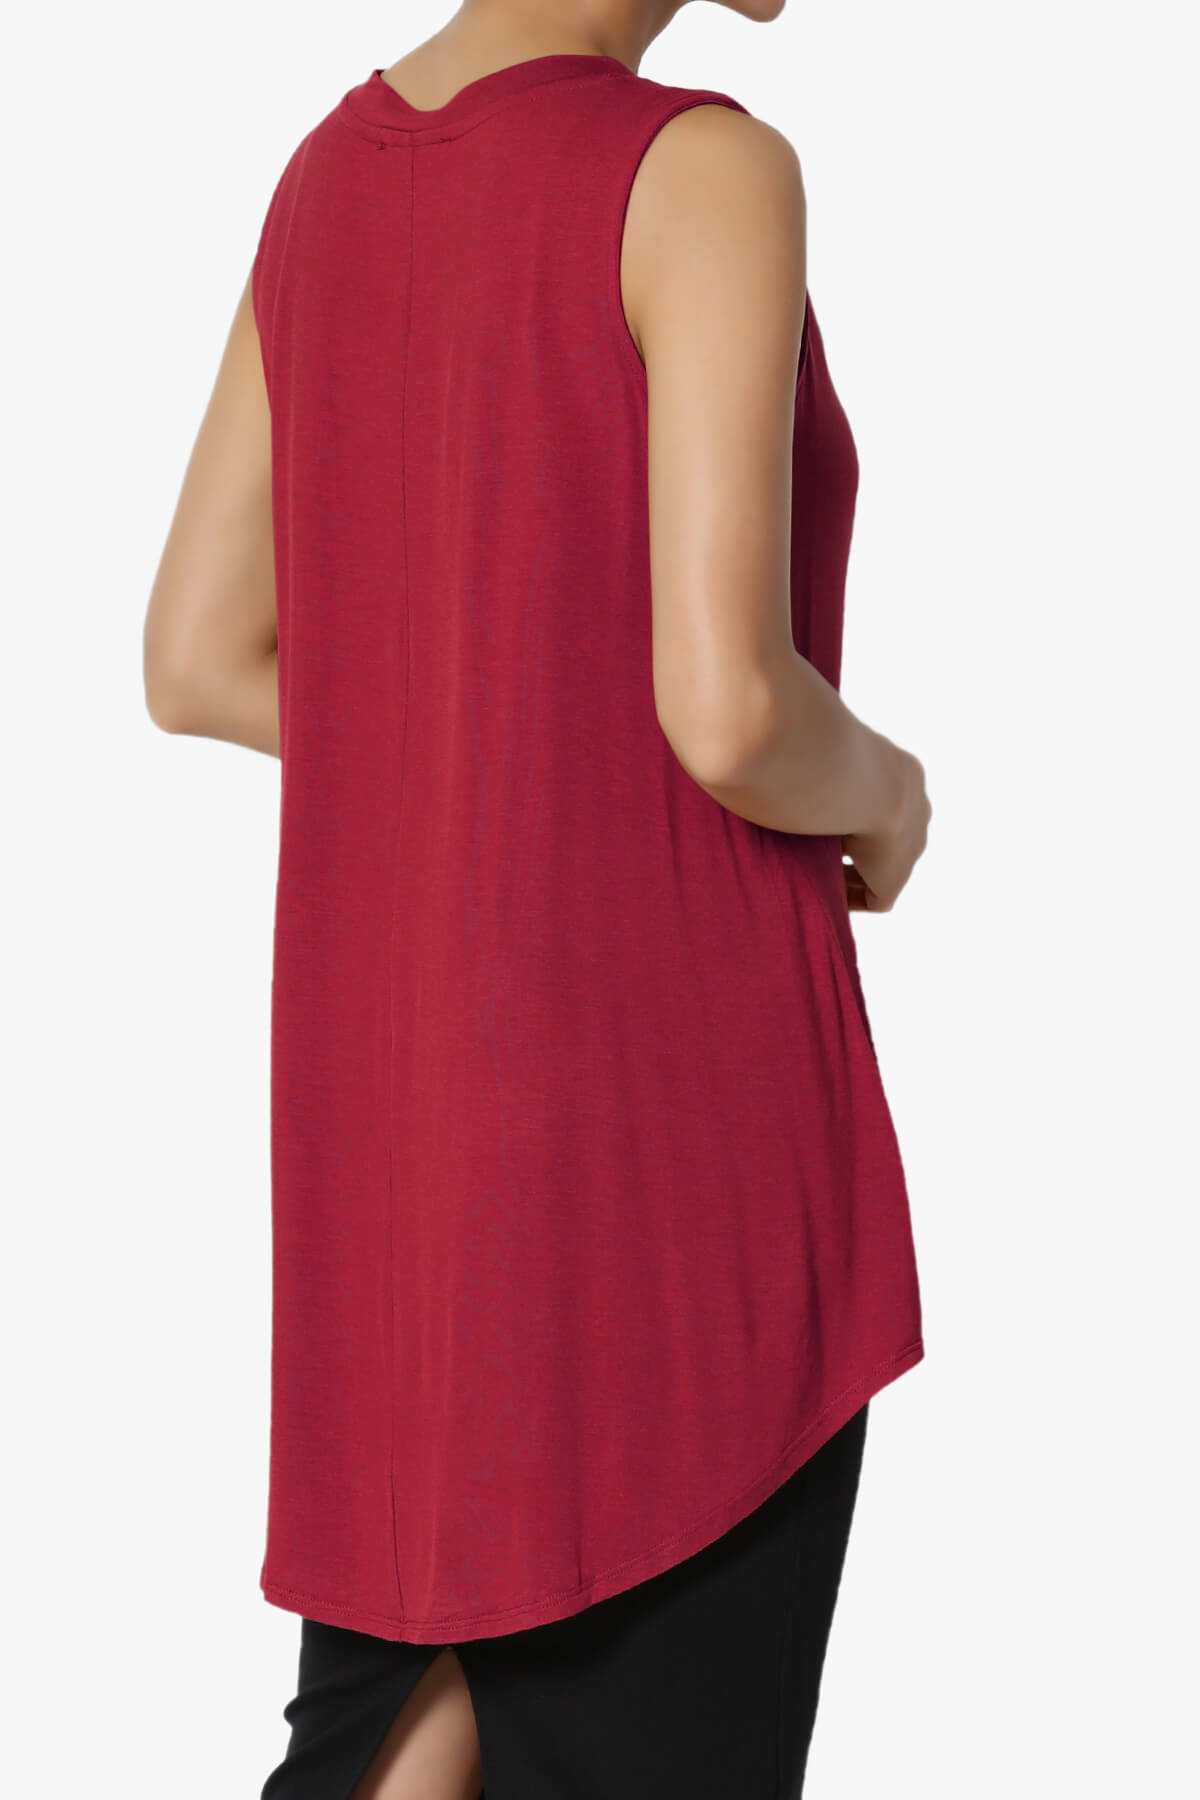 Load image into Gallery viewer, Myles Sleeveless V-Neck Luxe Jersey Top BURGUNDY_4
